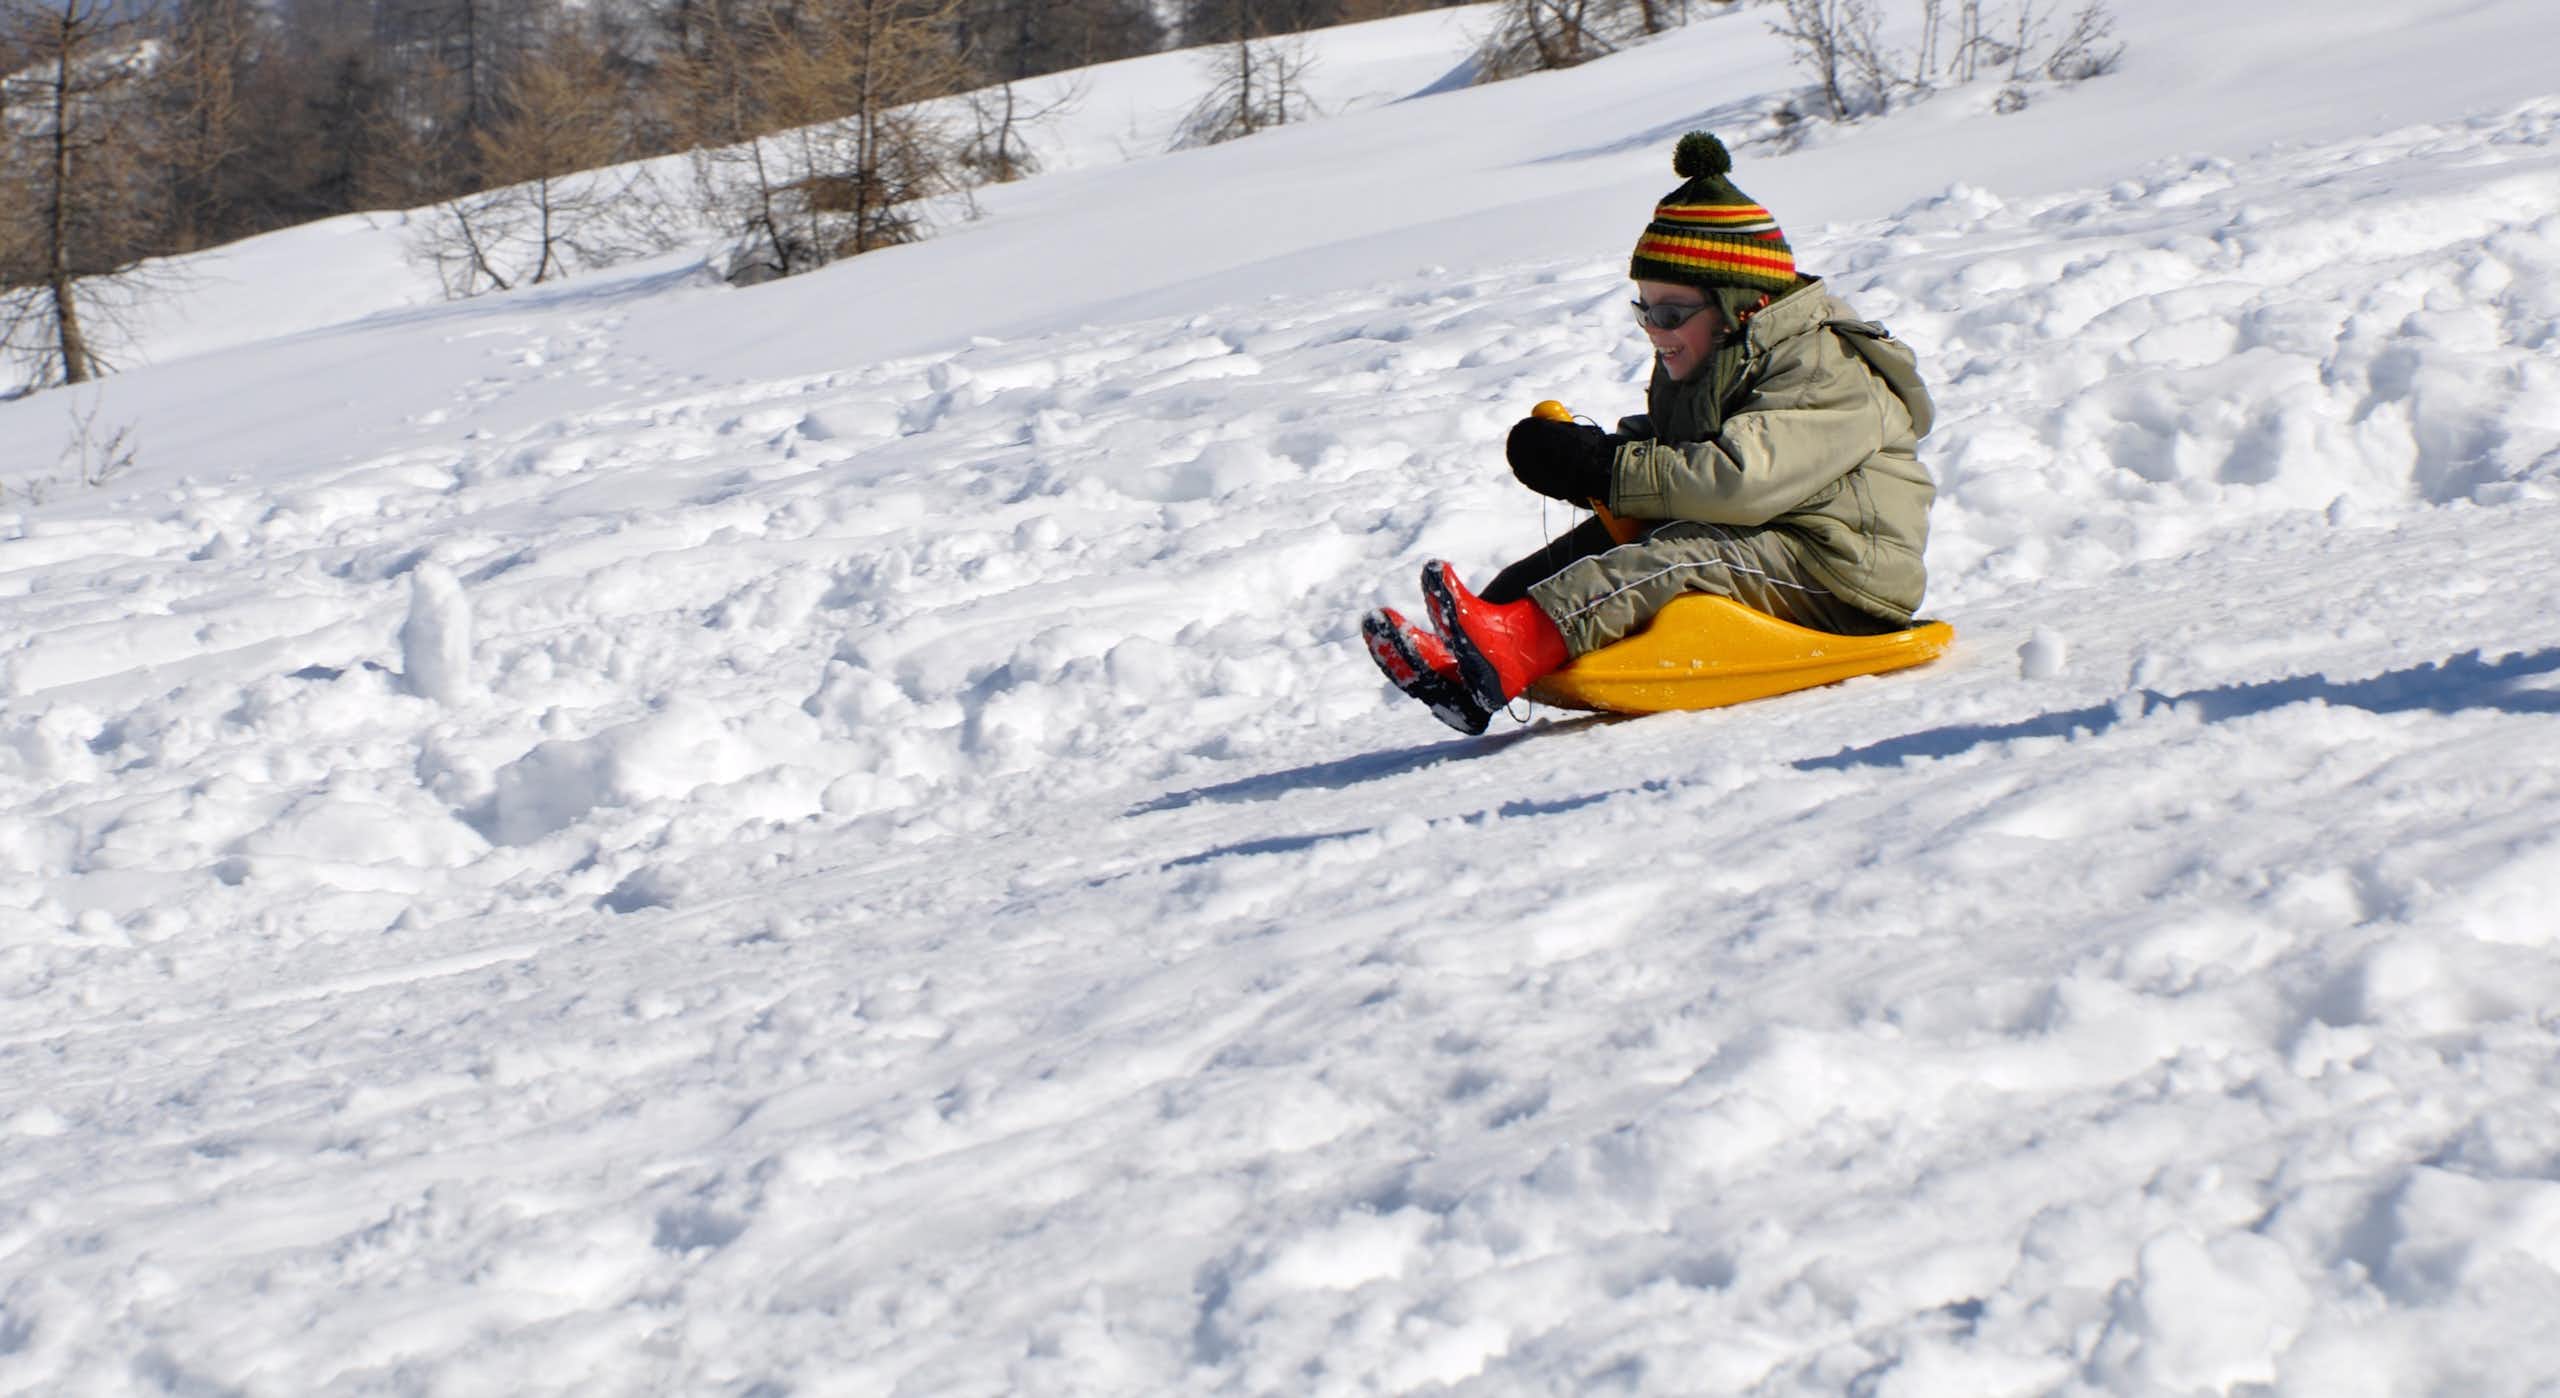 A young girl goes sledding down a snow-covered hill.